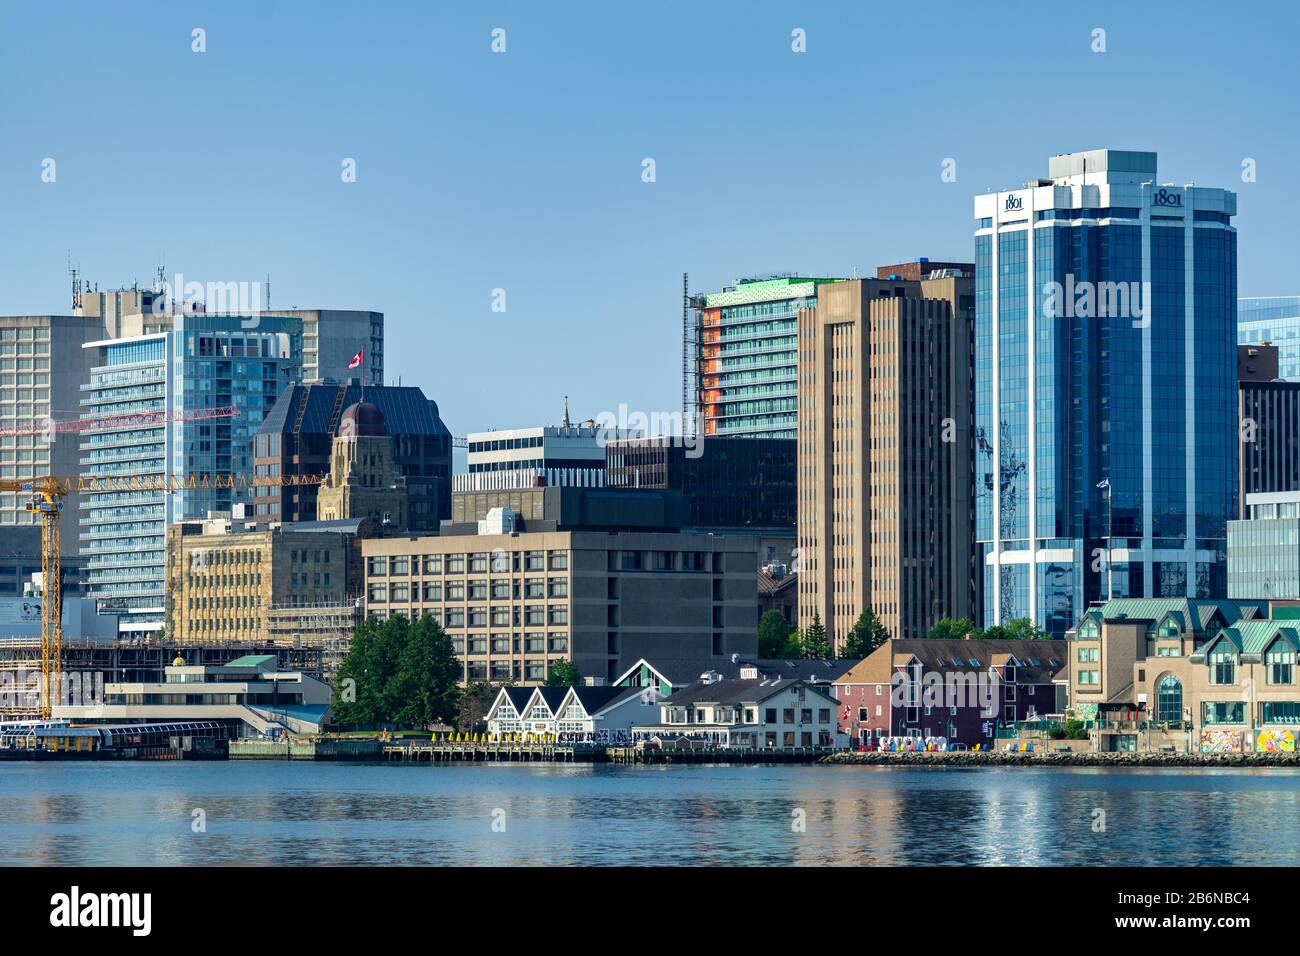 View from the Dartmouth side of Halifax Harbour, Nova Scotia, Canada, facing the waterfront of the city of Halifax. Stock Photo